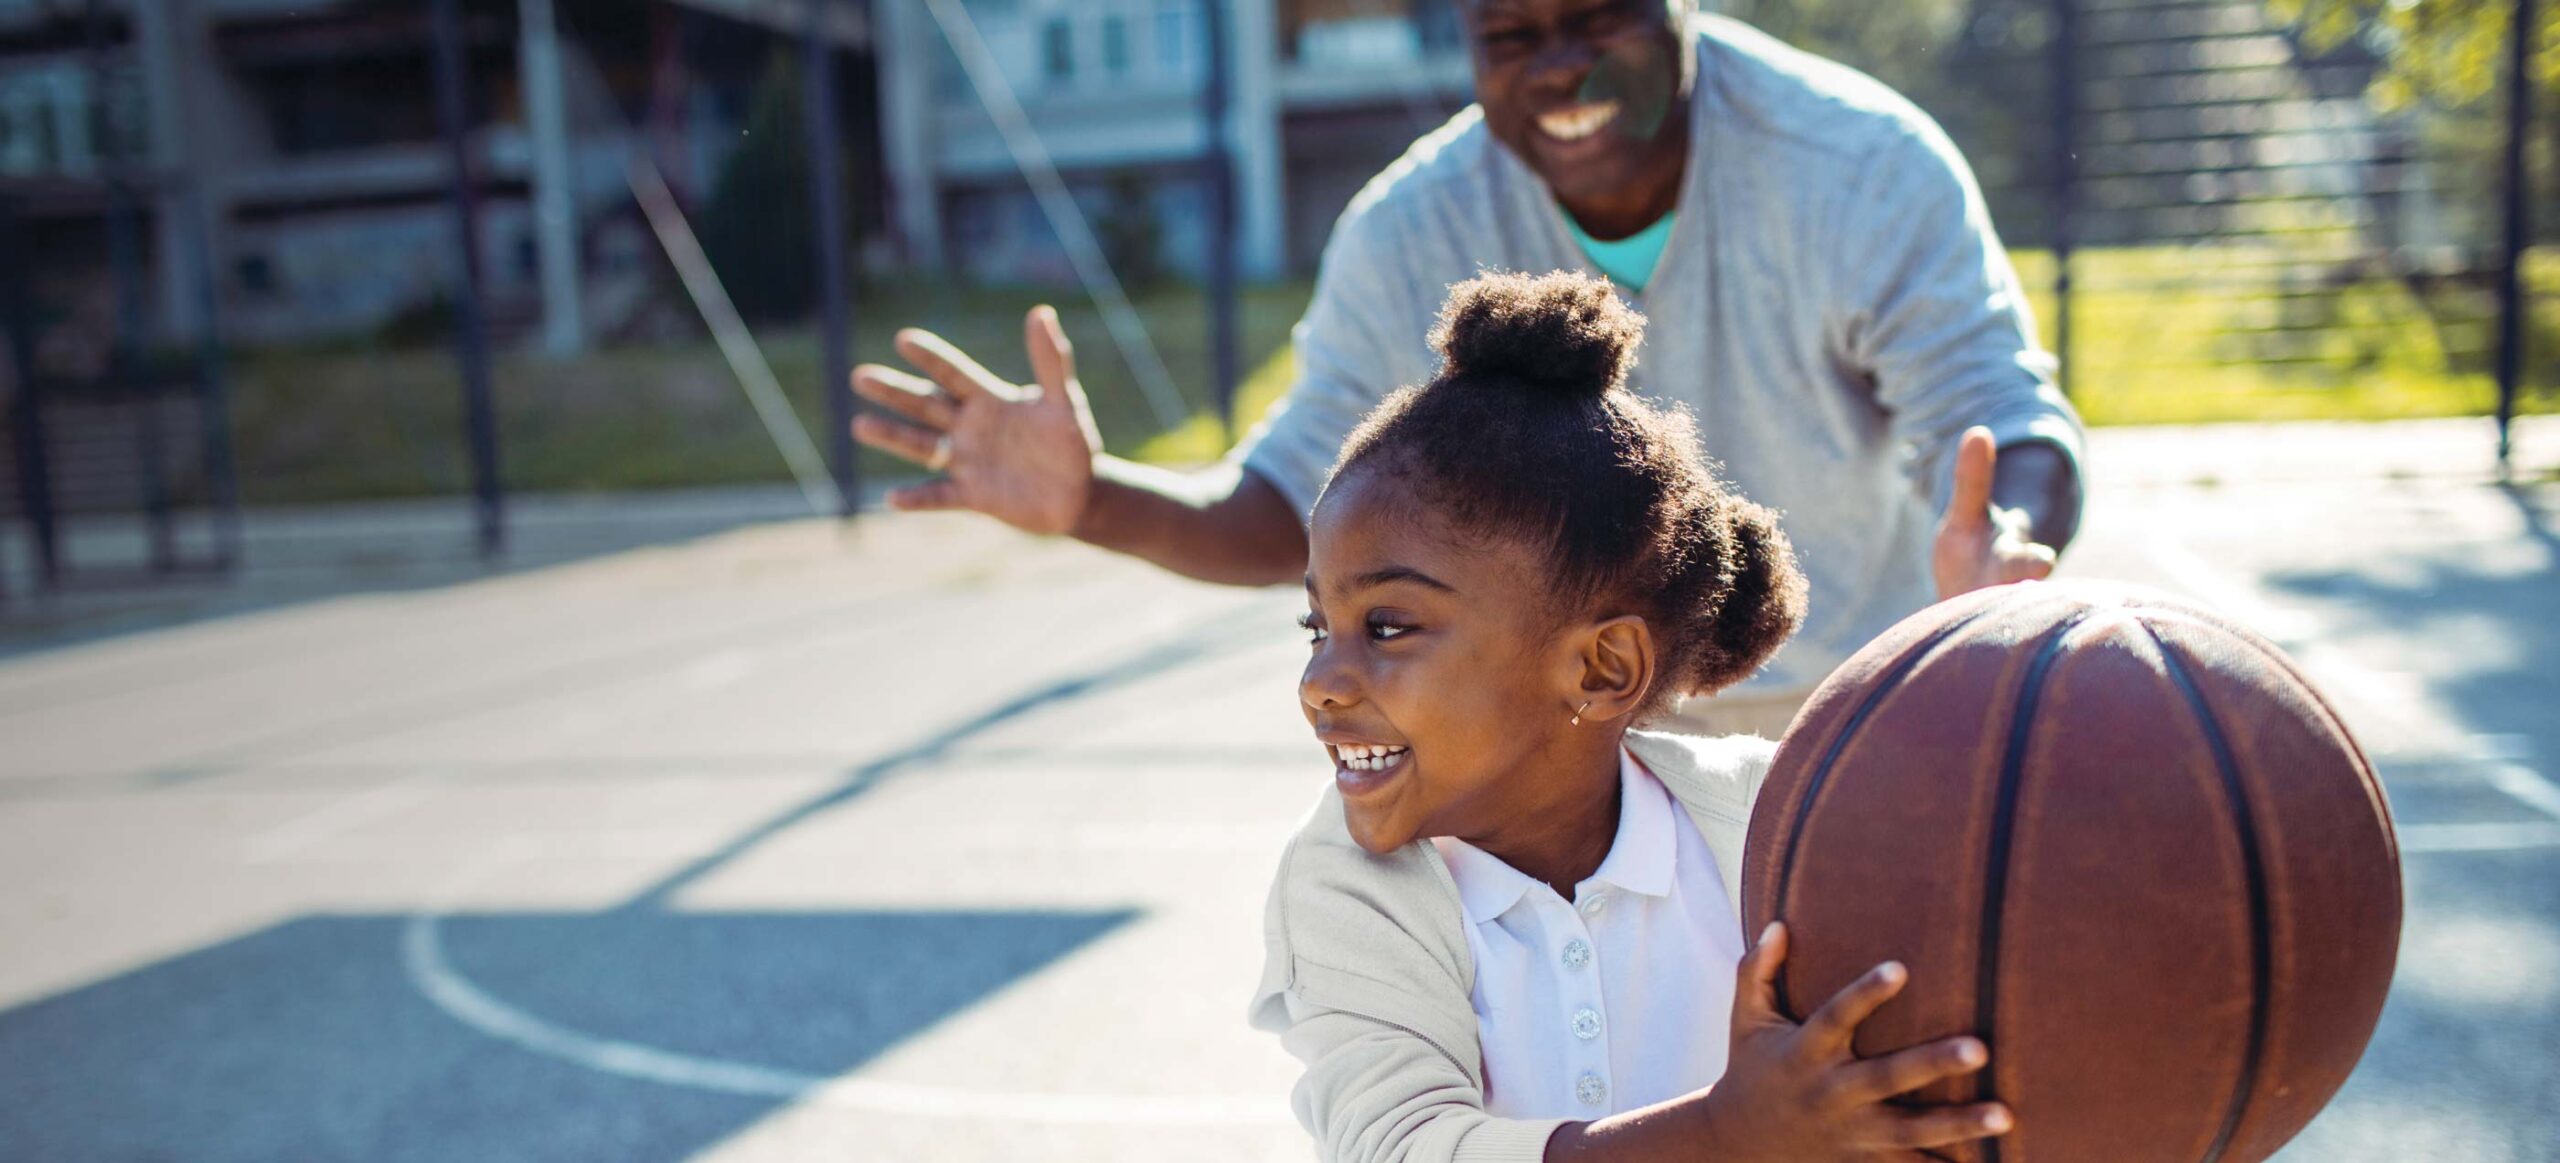 Dad and daughter playing basketball outdoors